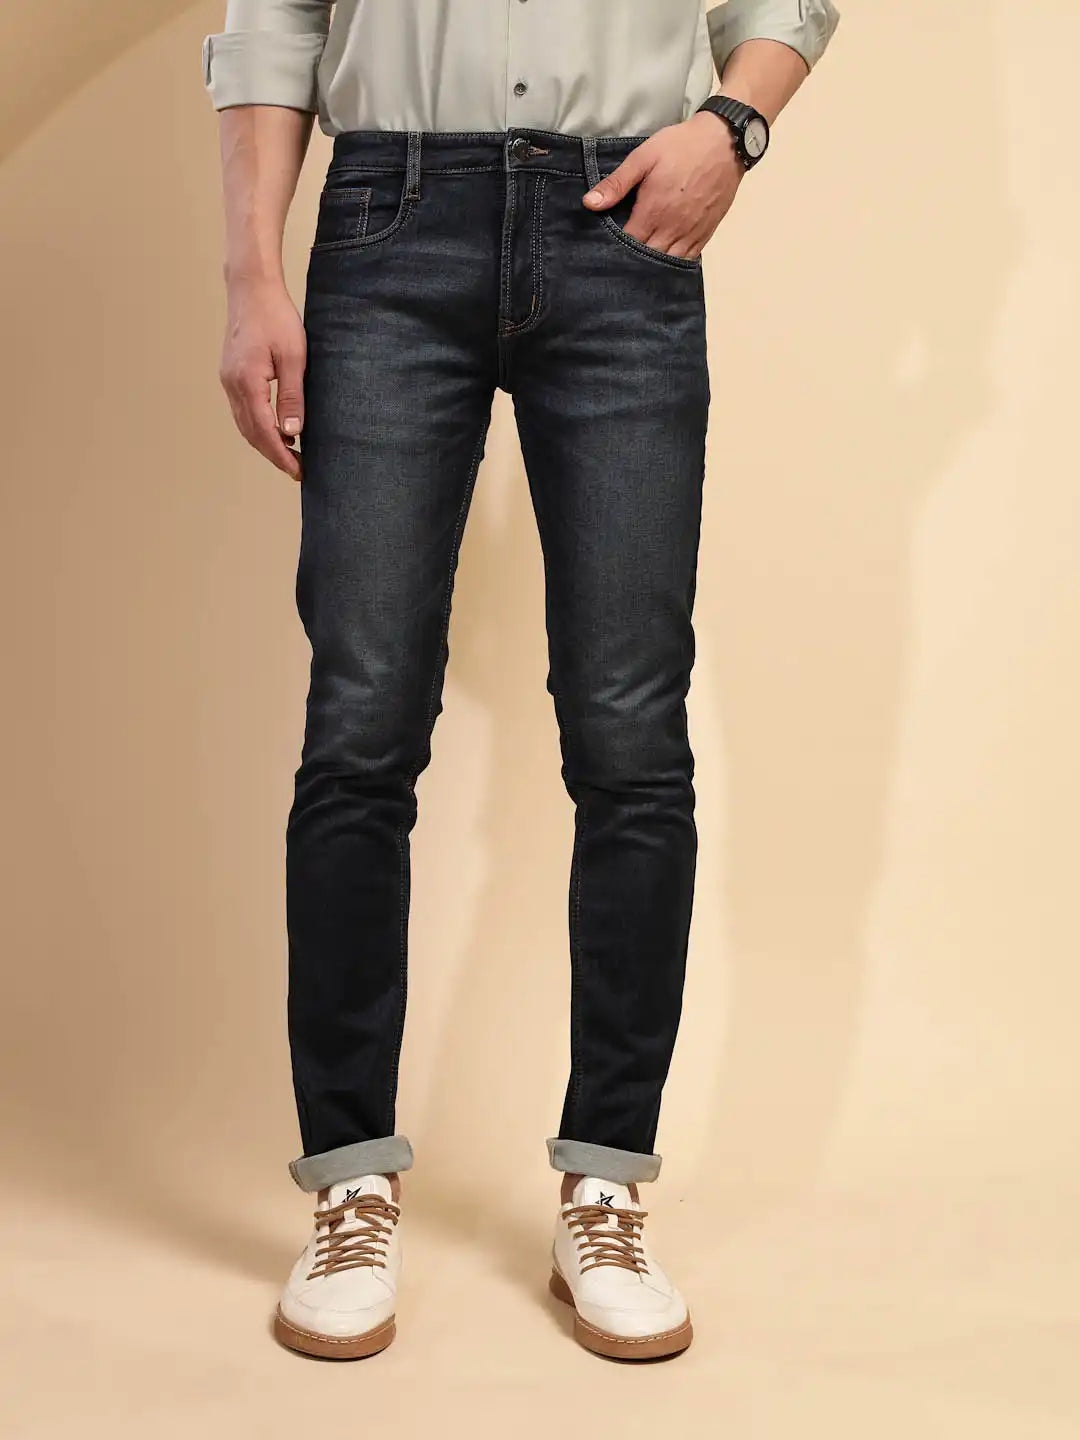 Tint Blue Solid Mid Rise Denim Cuffing Jeans